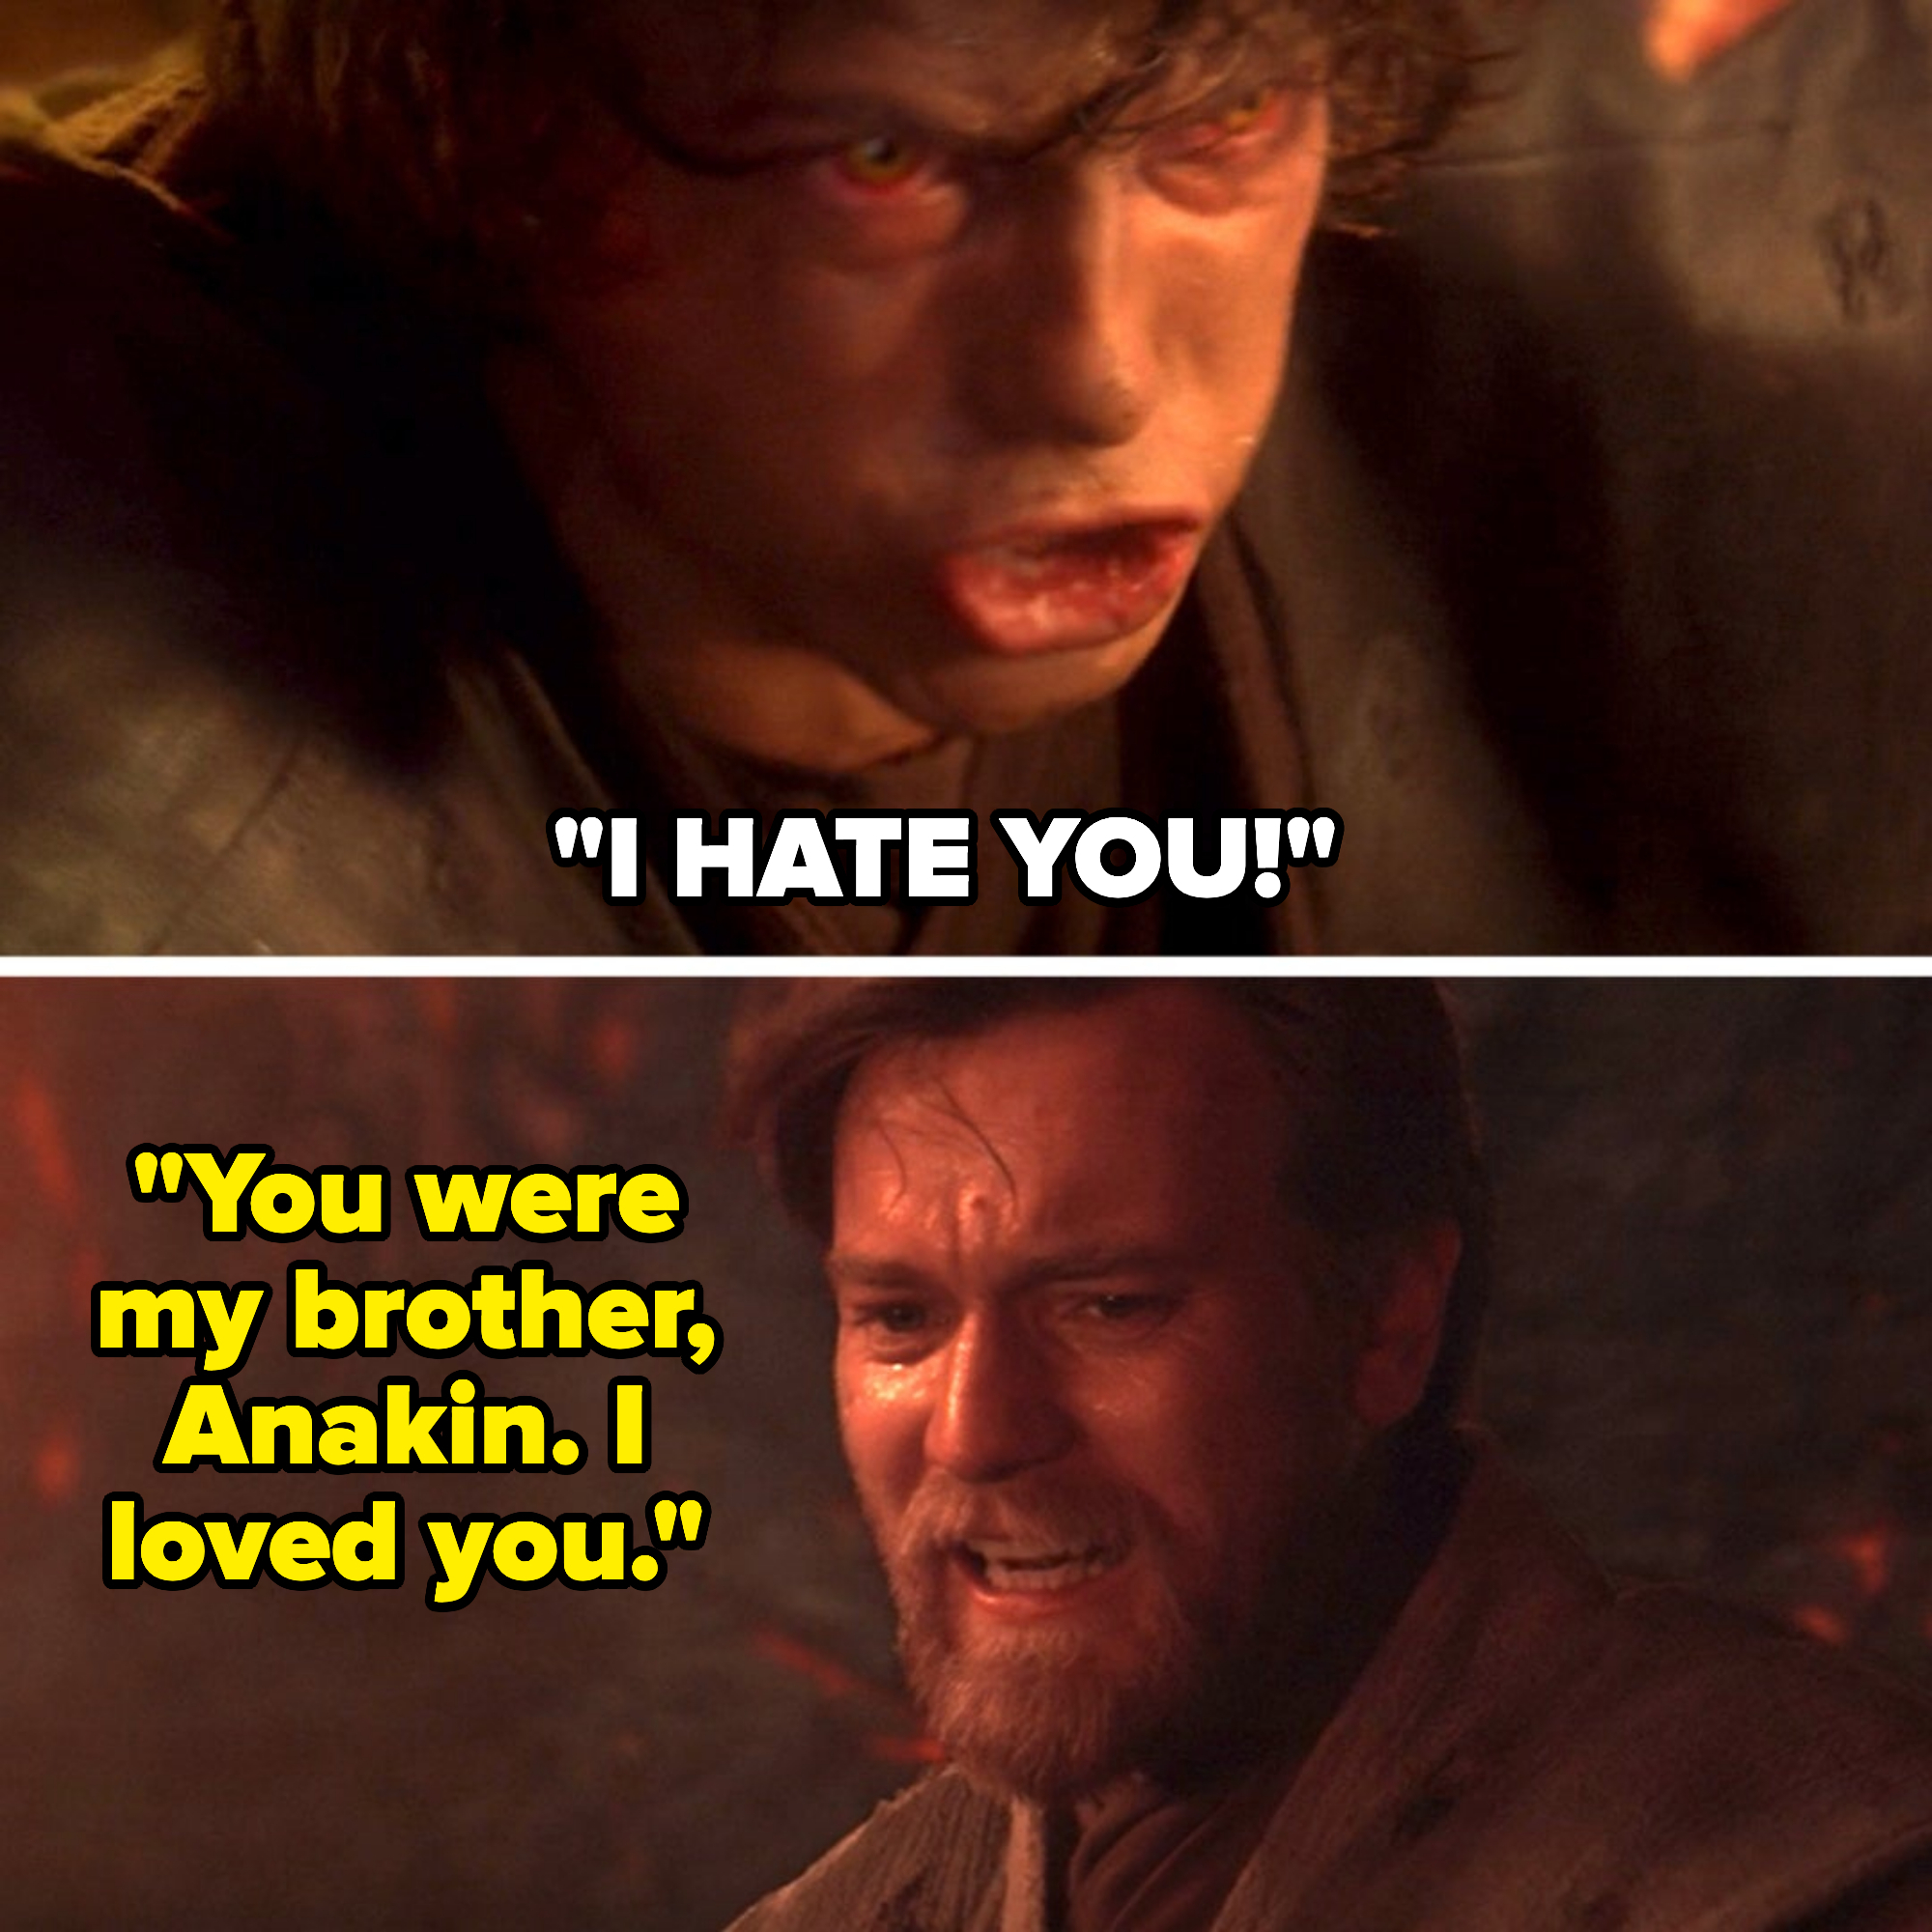 him saying, you were my brother anakin, i loved you